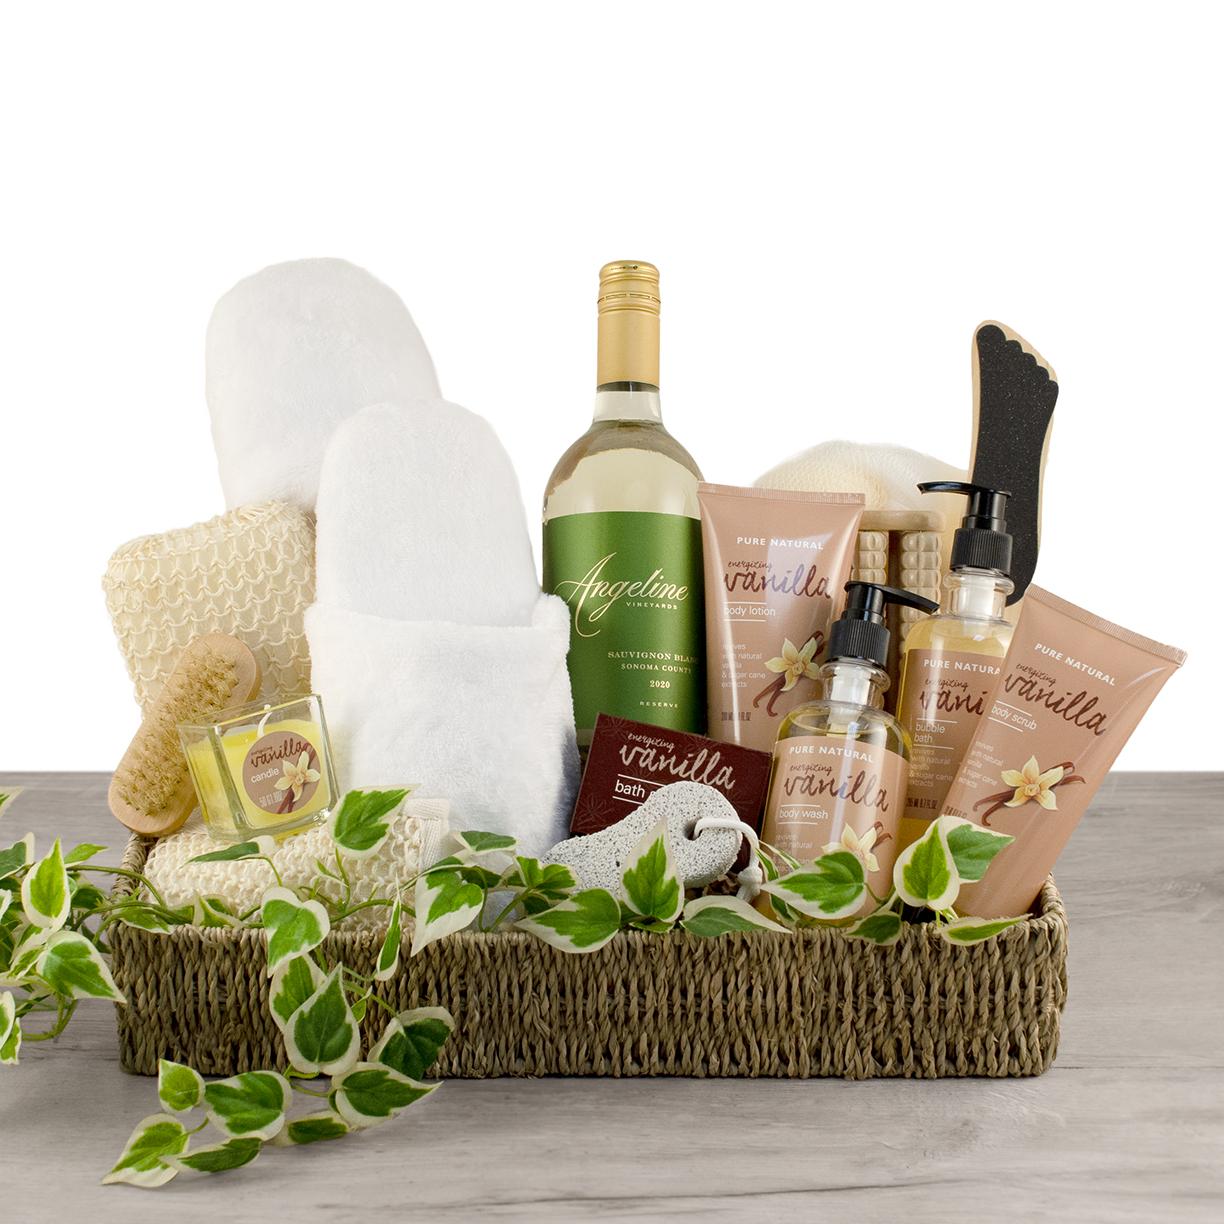 Essential Home Spa & White Wine Gift Basket by Wine Basket | White Wine Gift Baskets | Spa Gift Baskets | Gift Baskets Delivered